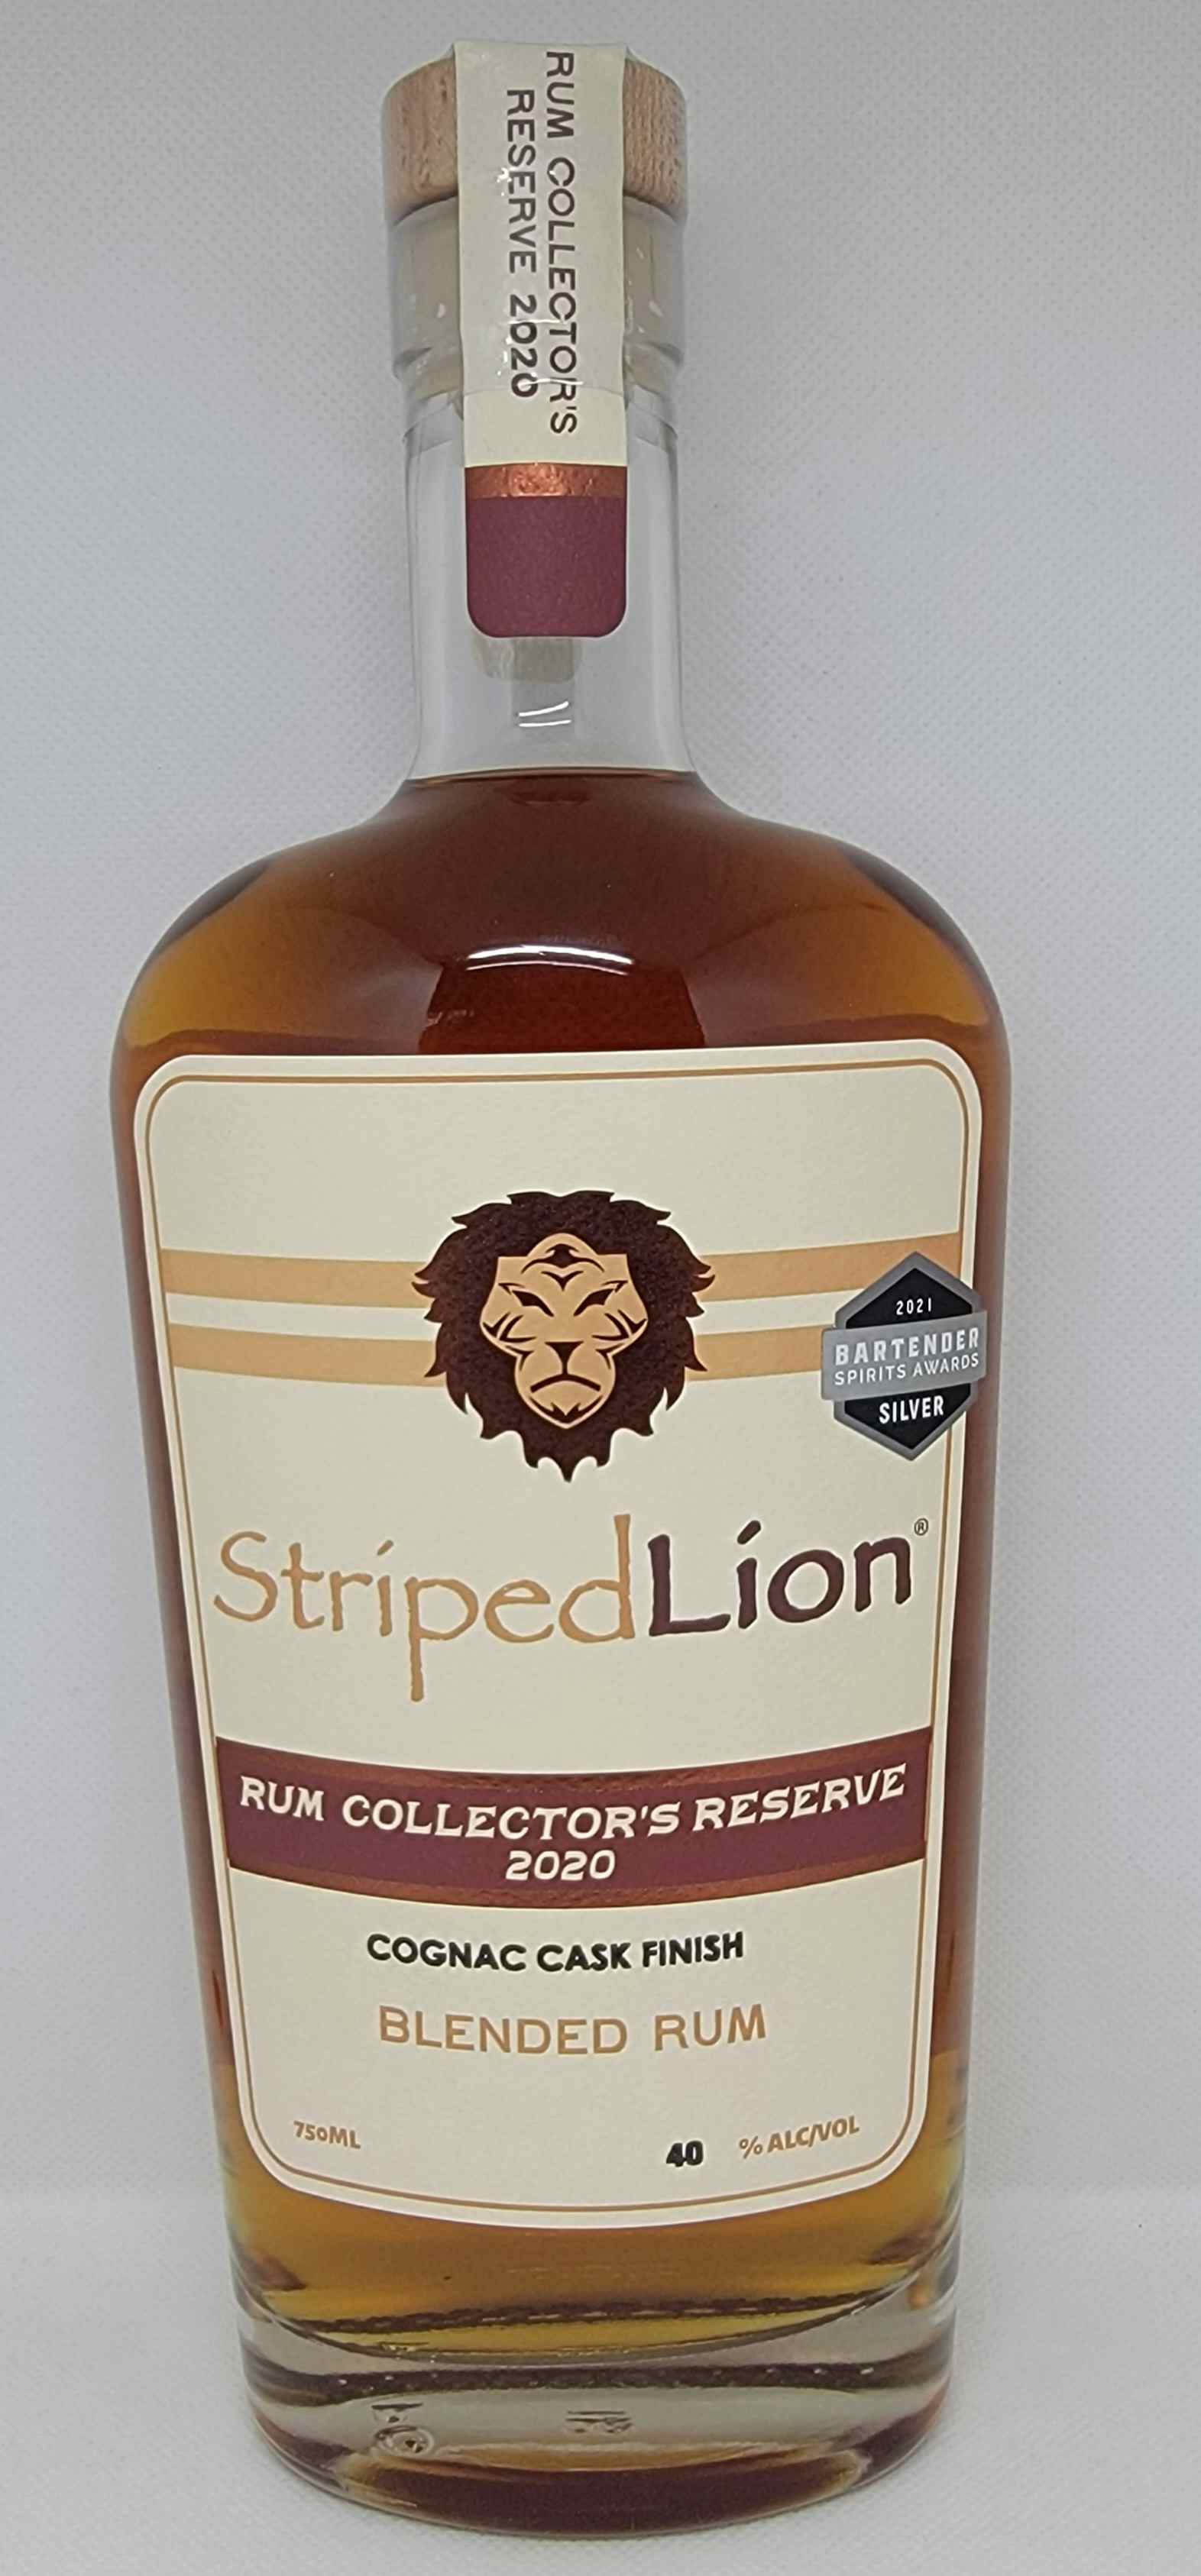 Price Lion Reserve Rum & Cognac Reviews Striped Collector\'s Rum Finish | Cask Drizly 2020